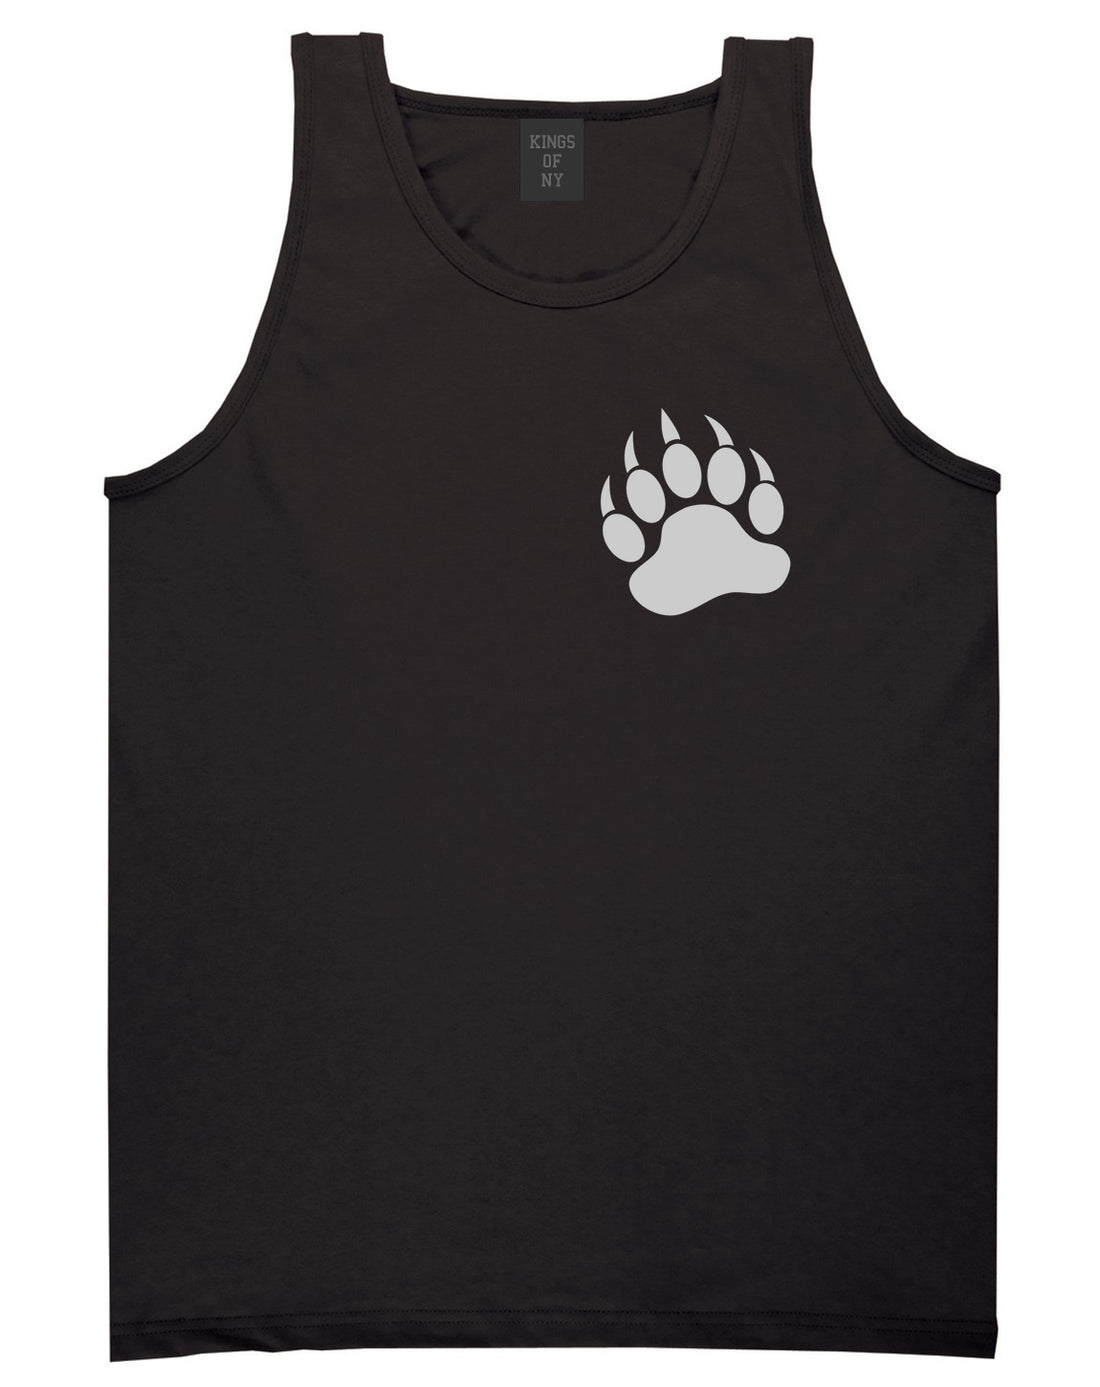 Bear Paws Chest Black Tank Top Shirt by Kings Of NY